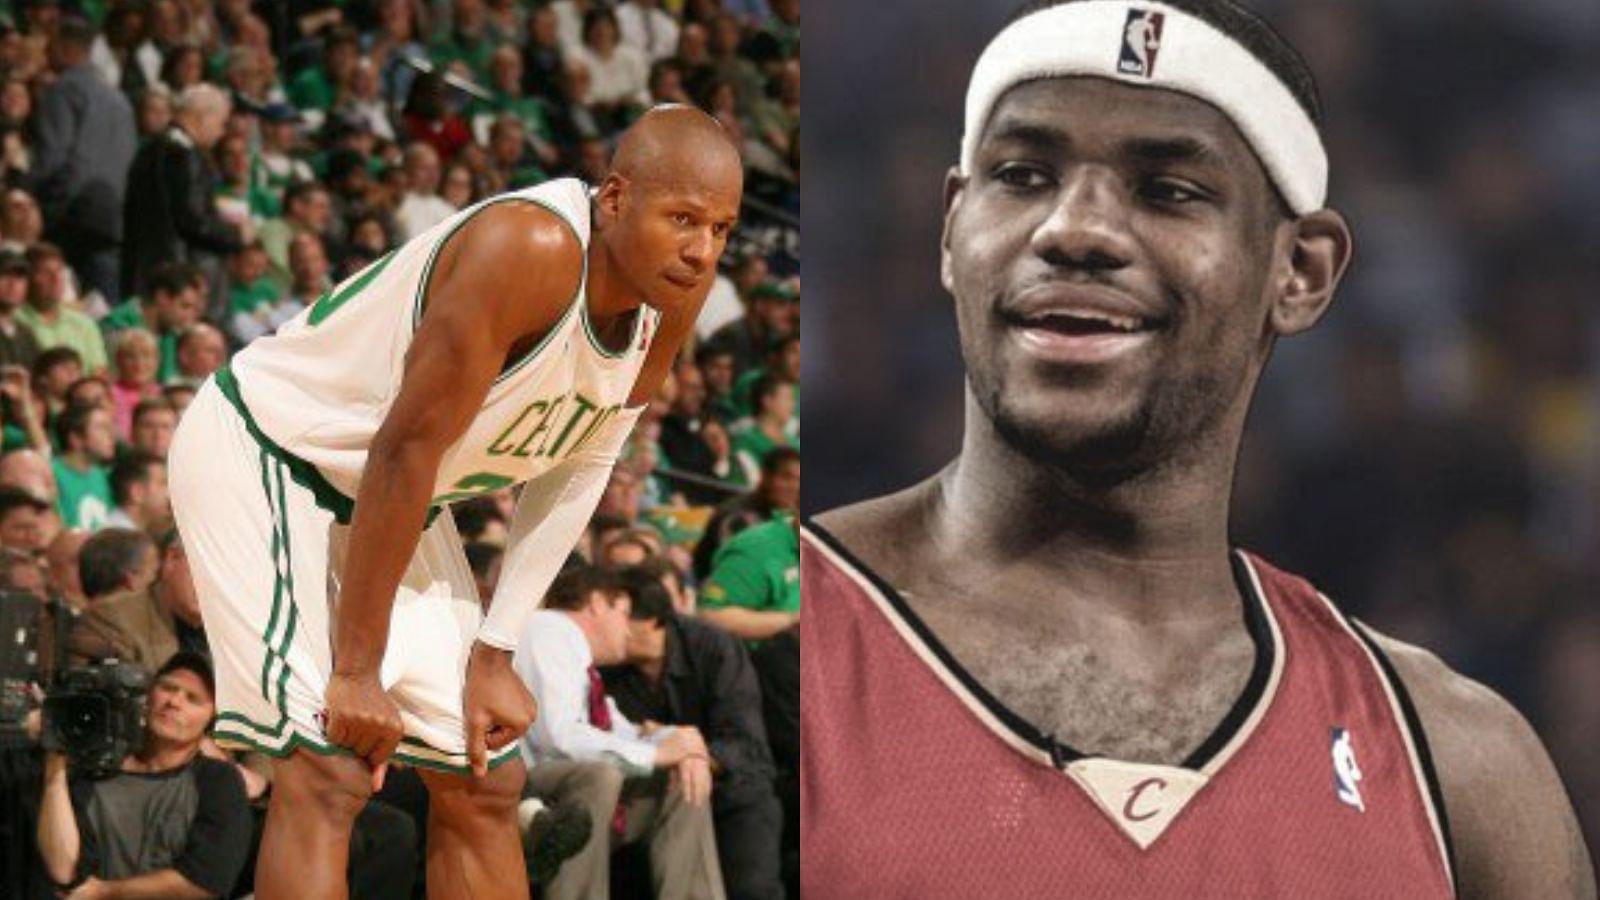 “Now we know where Ray Allen’s hate for LeBron James is coming from”: NBA Twitter brings up a compilation of Lakers star humiliating former Celtics star back in the day